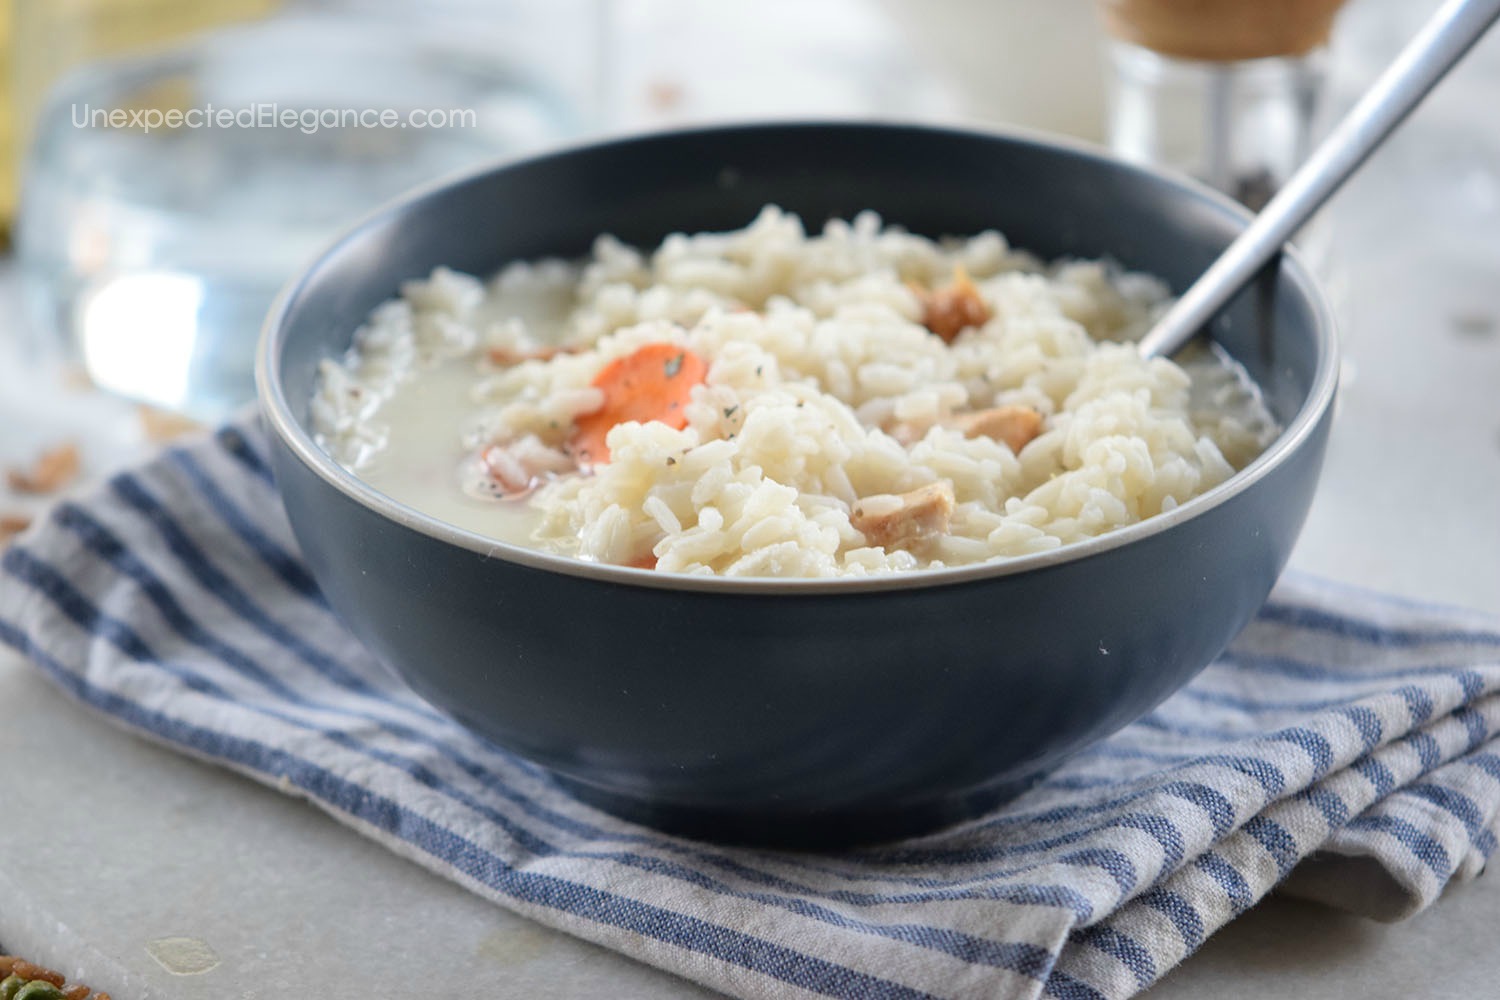 Give this rice and chicken soup a try. It's creamy and delicious!